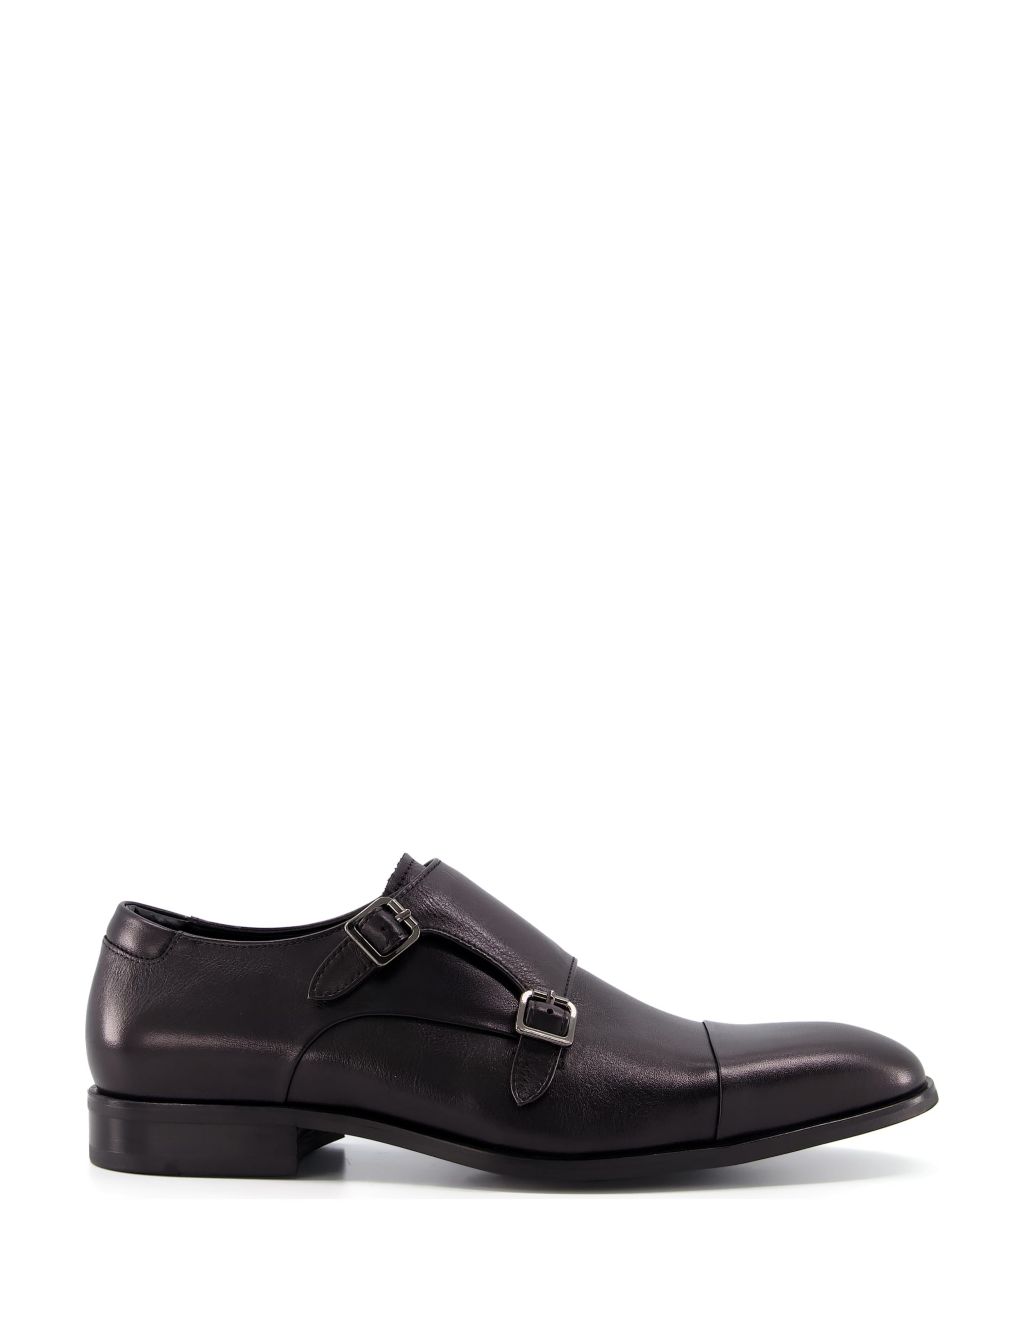 Leather Double Monk Strap Shoes image 1